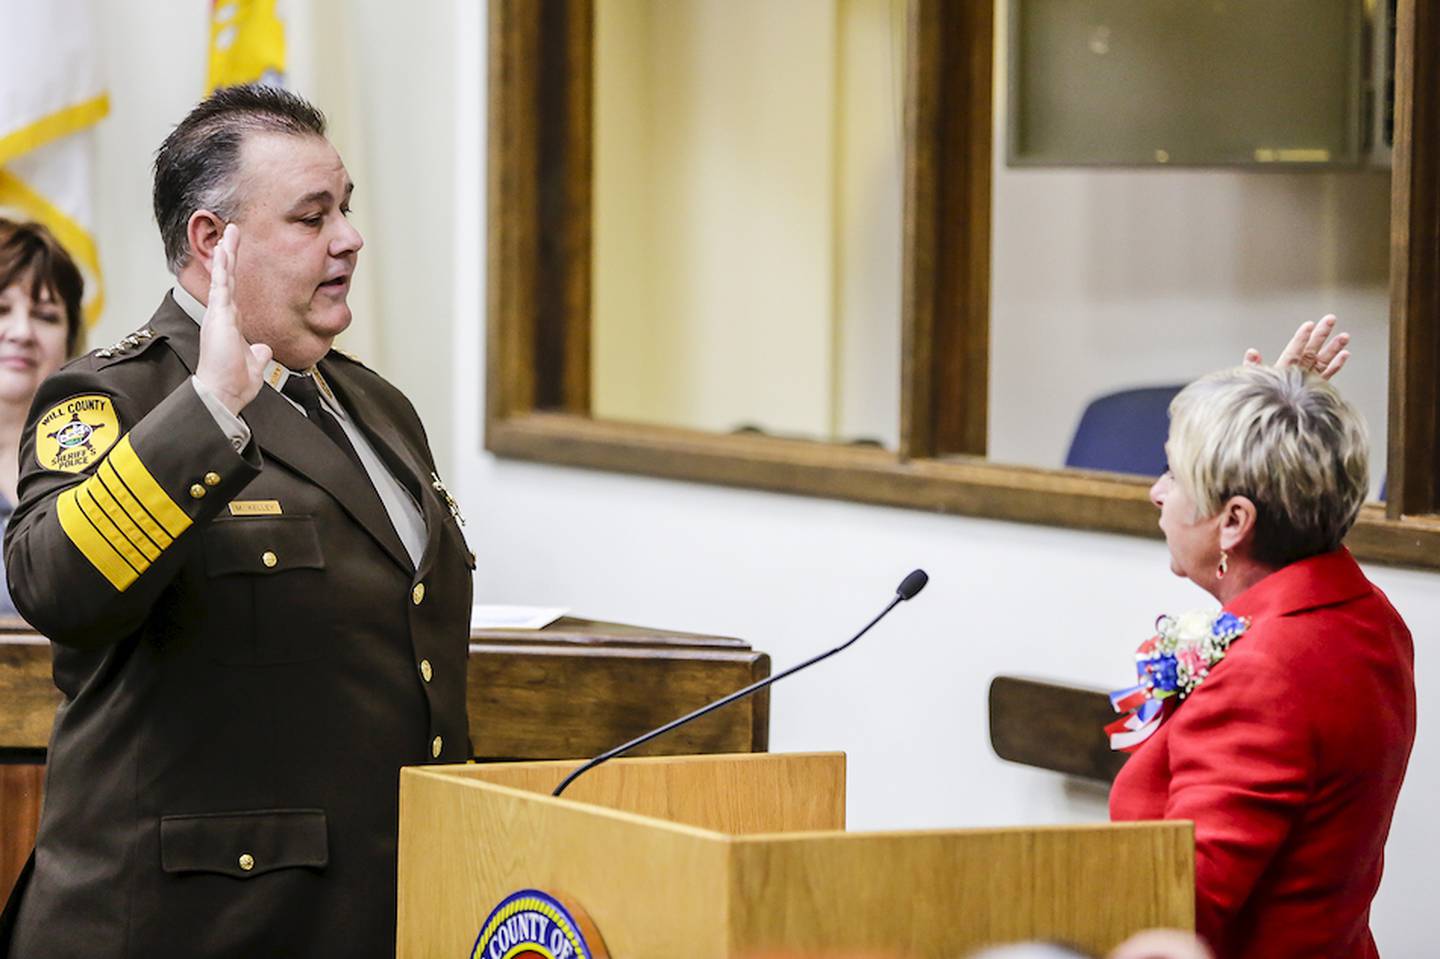 Newly elected Will County Sheriff Mike Kelley is sworn in Monday by Will County Clerk Nancy Schultz-Voots.